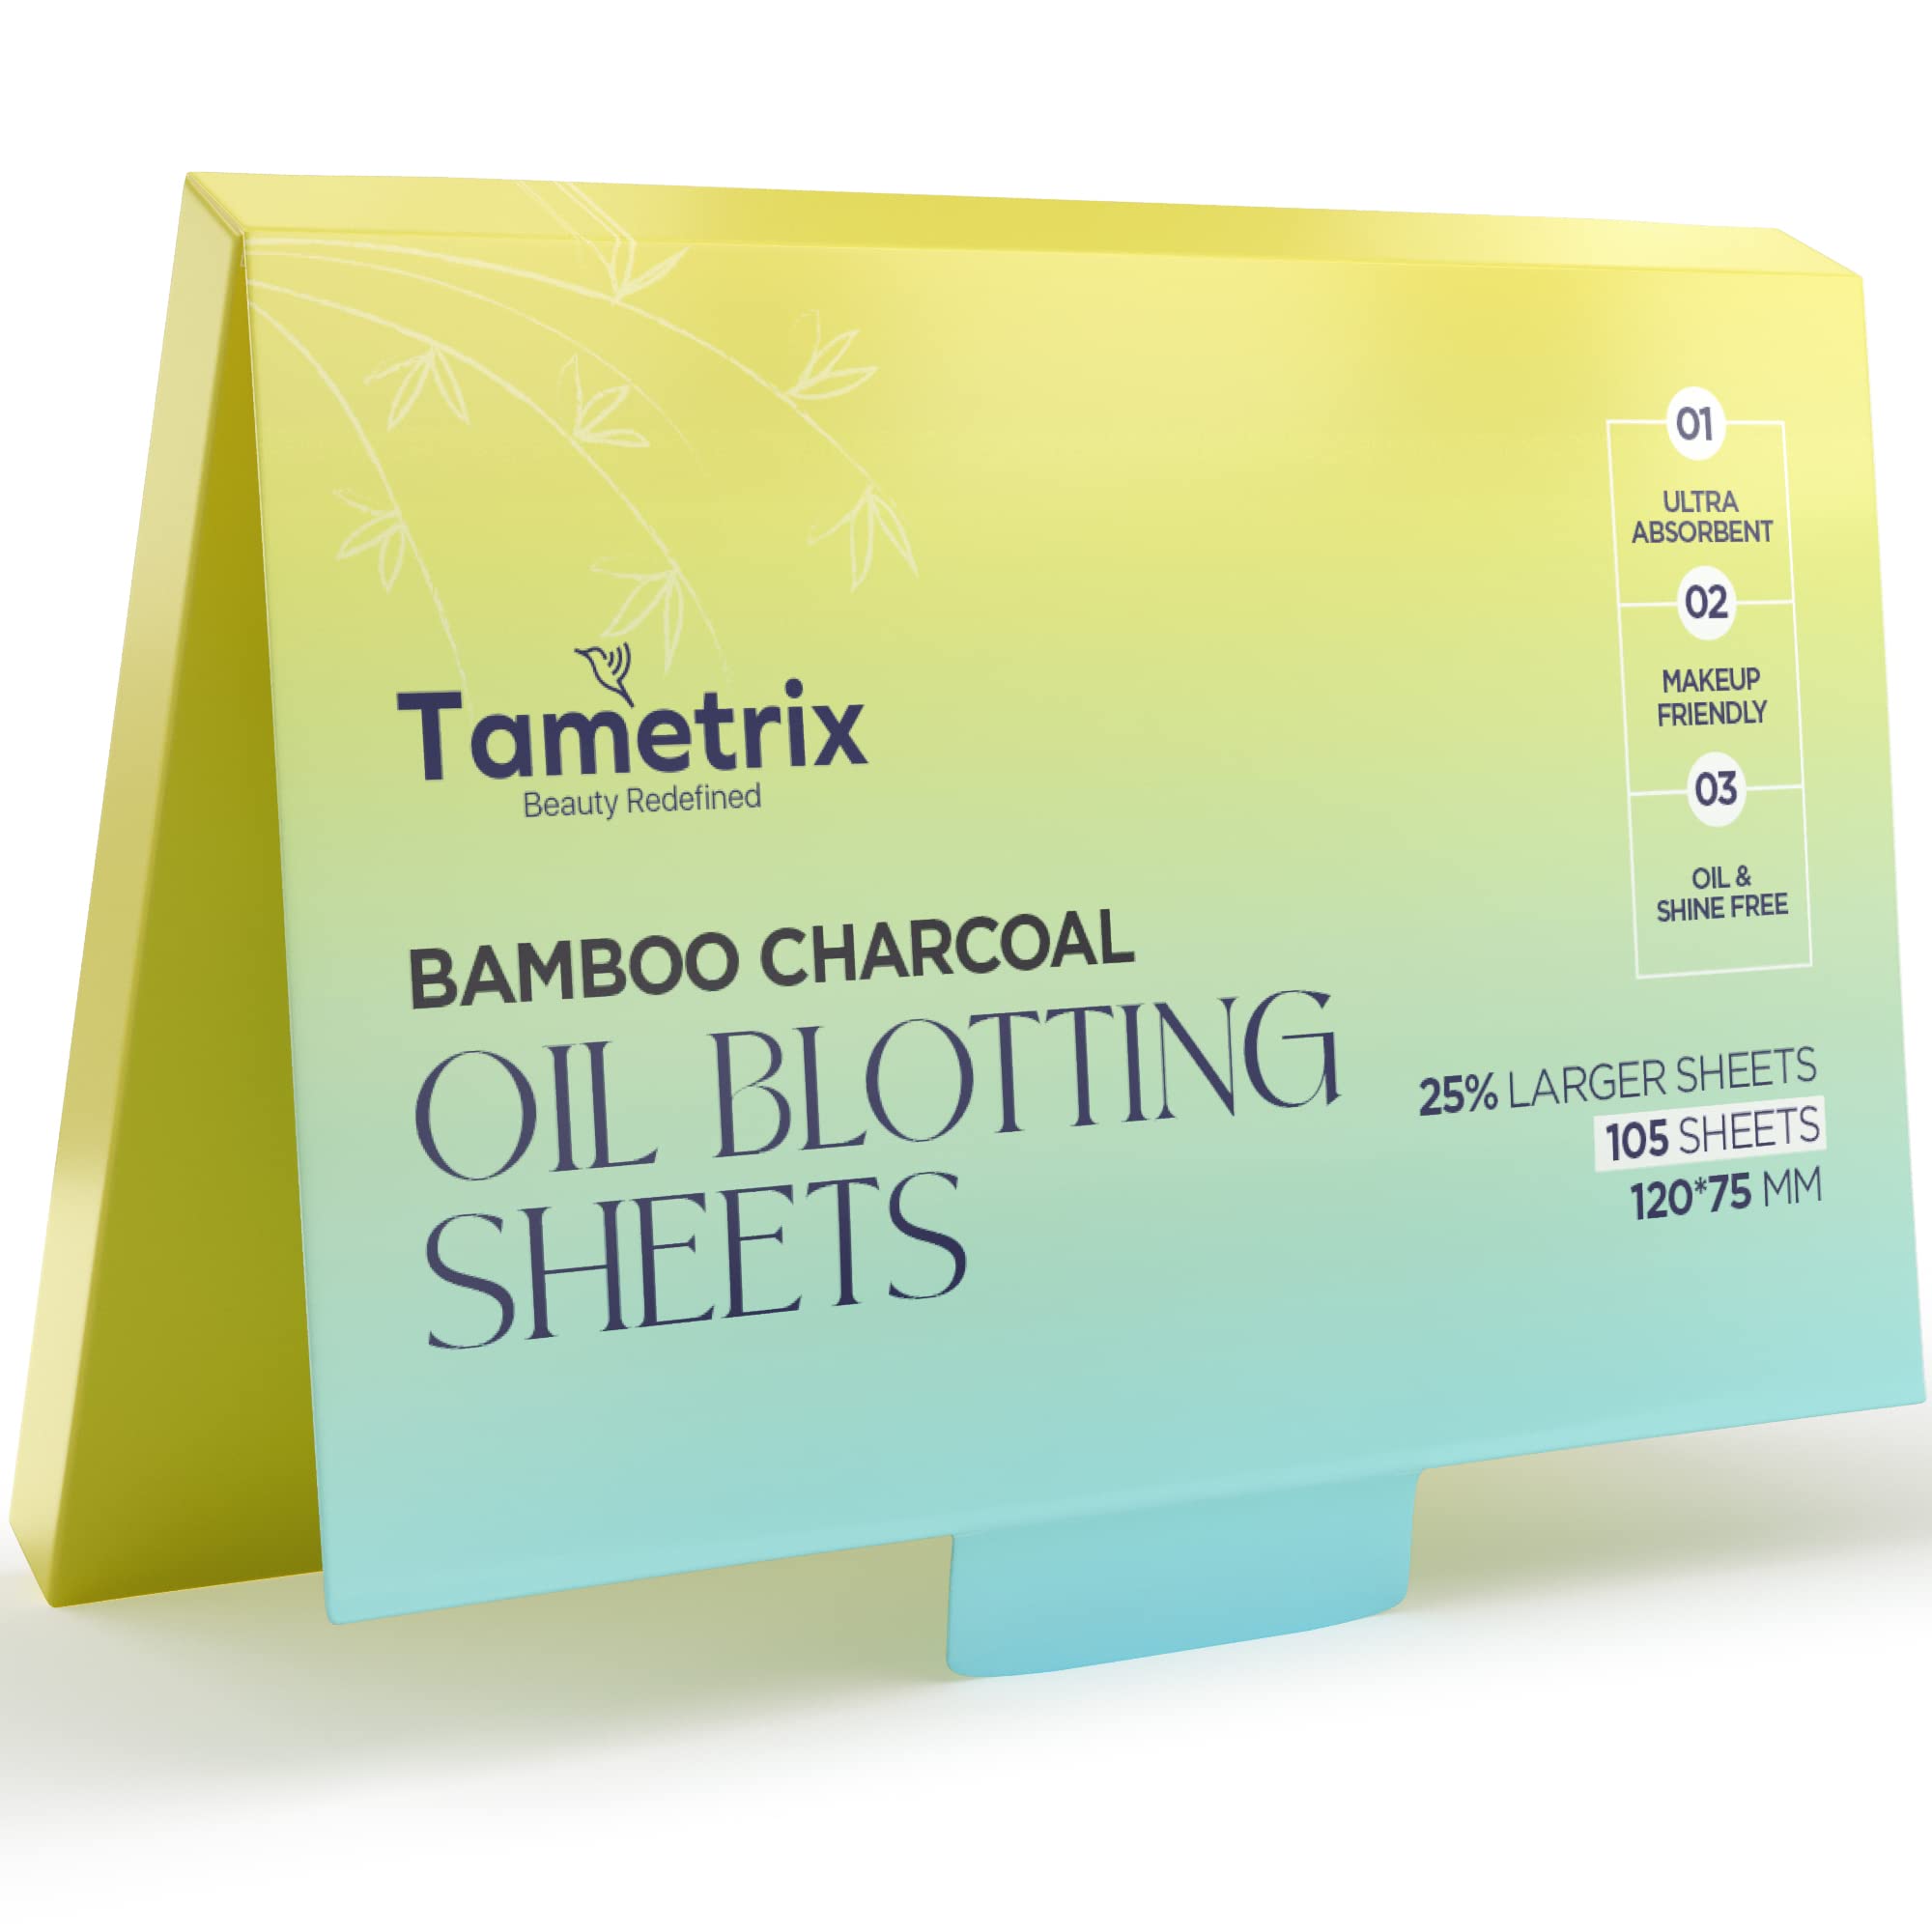 Tametrix Natural Bamboo Charcoal Oil Absorbing Sheets for Face - 25% larger Makeup Friendly Blotting Paper for Oily Skin - Easy to Pull One - 105 Count Oil Absorbing Tissues for Facial Skin Care